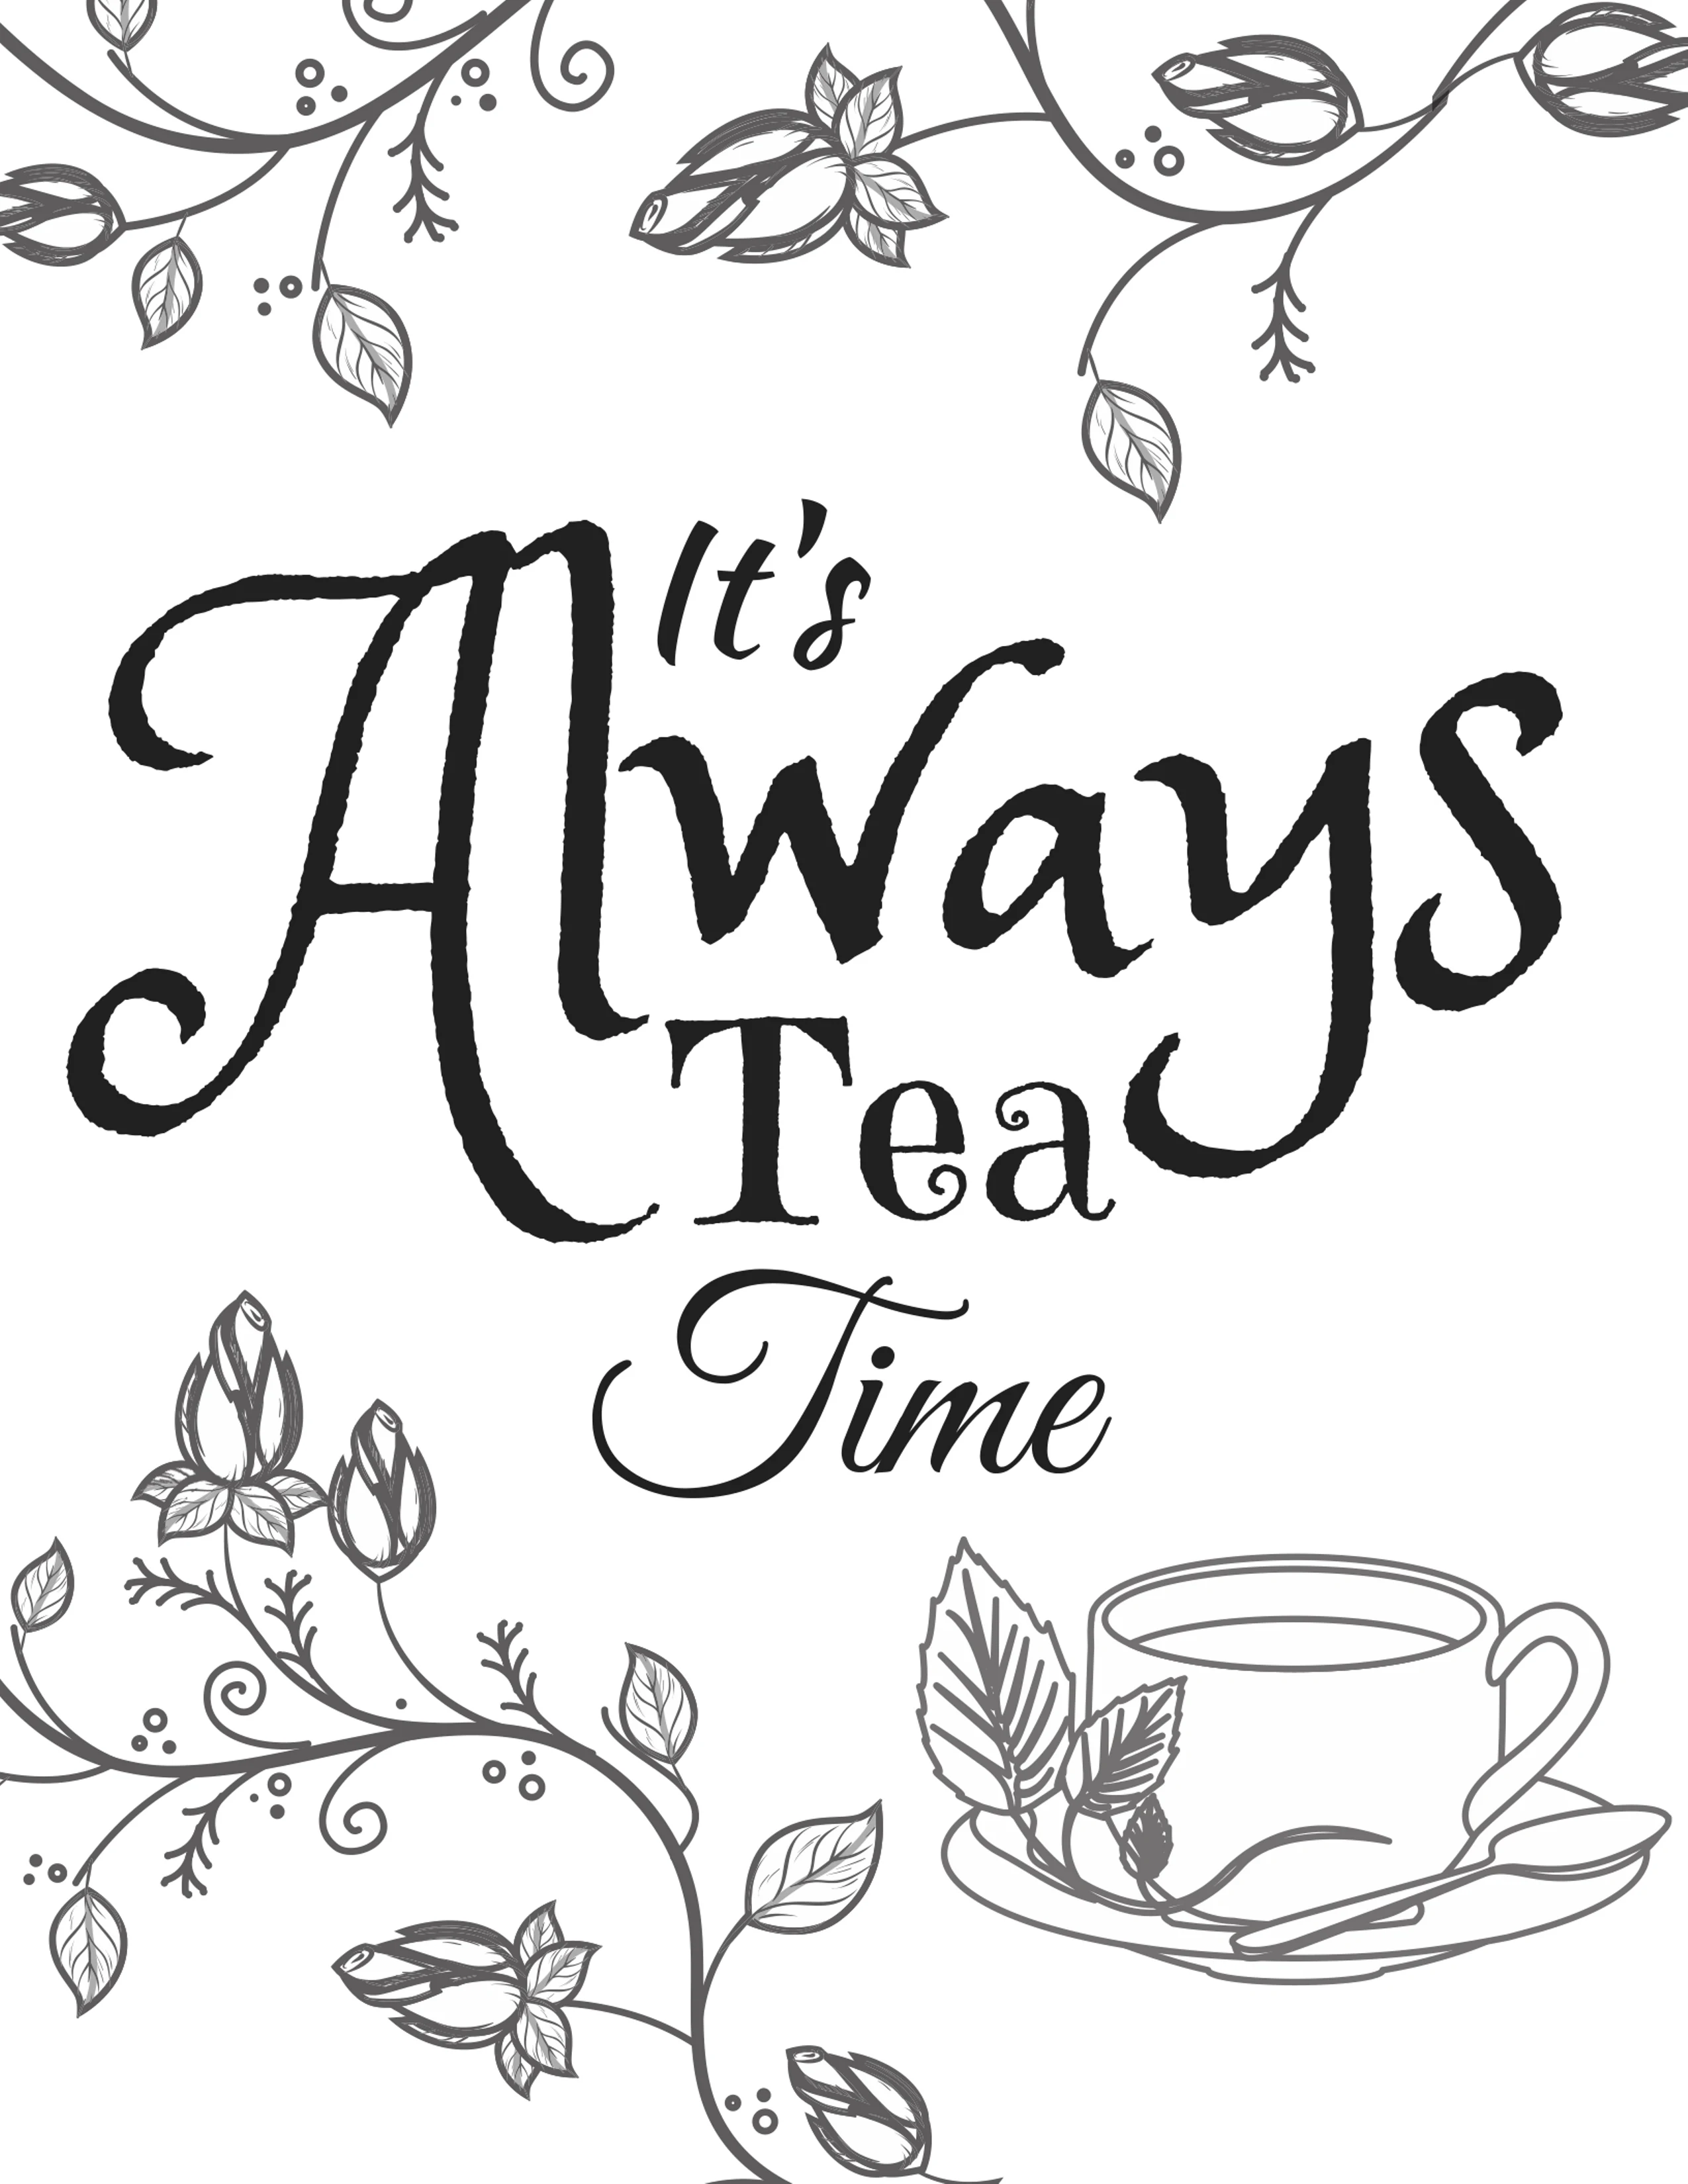 It's Always Tea time mad hatter tea party free printable quote art